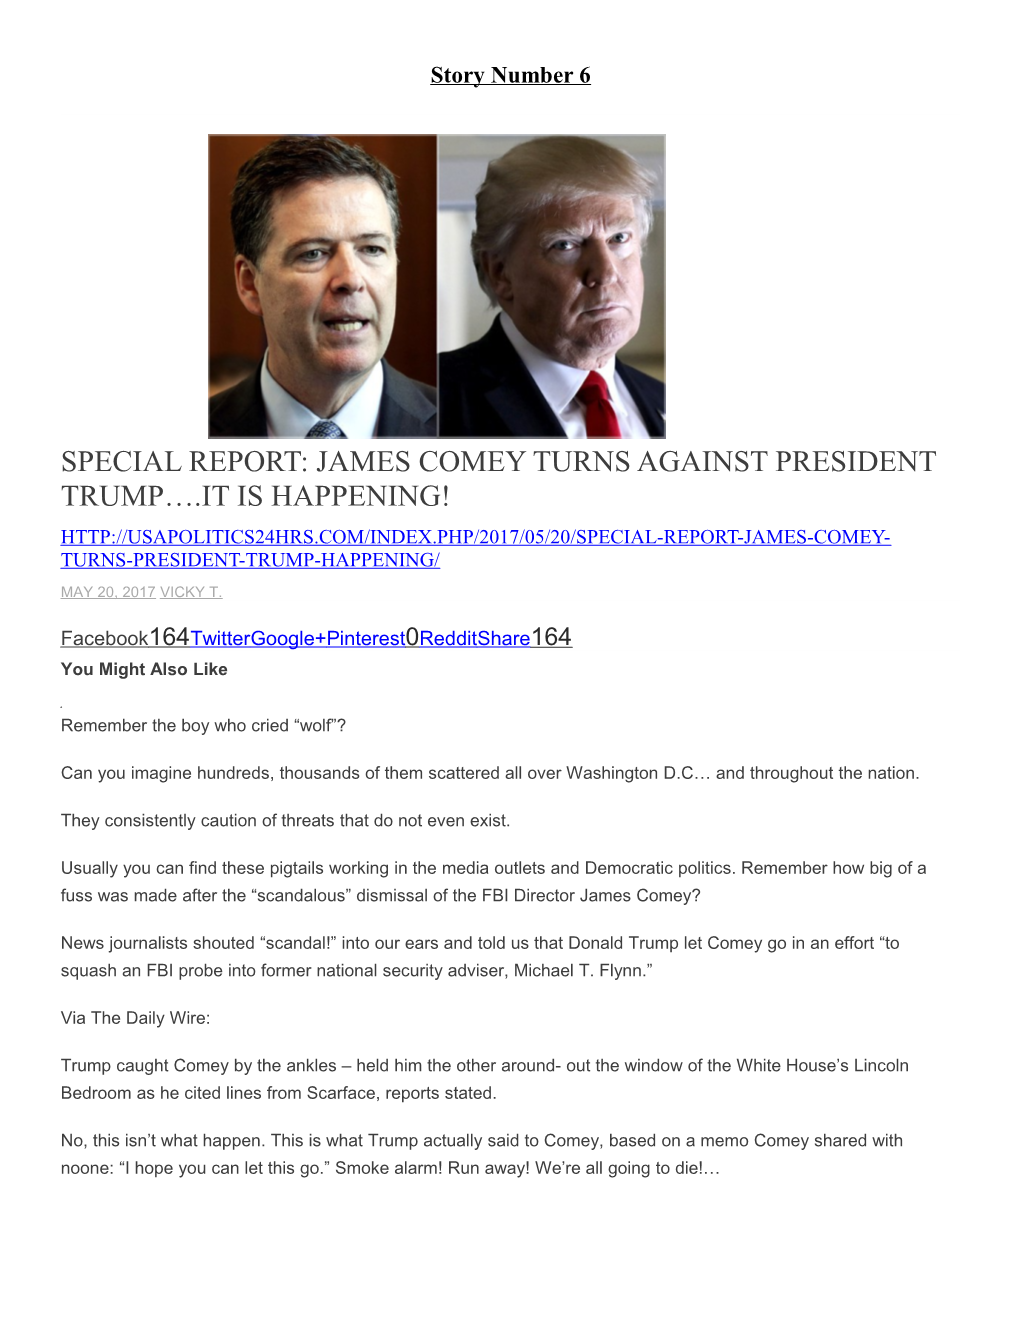 Special Report: James Comey Turns Against President Trump .It Is Happening!